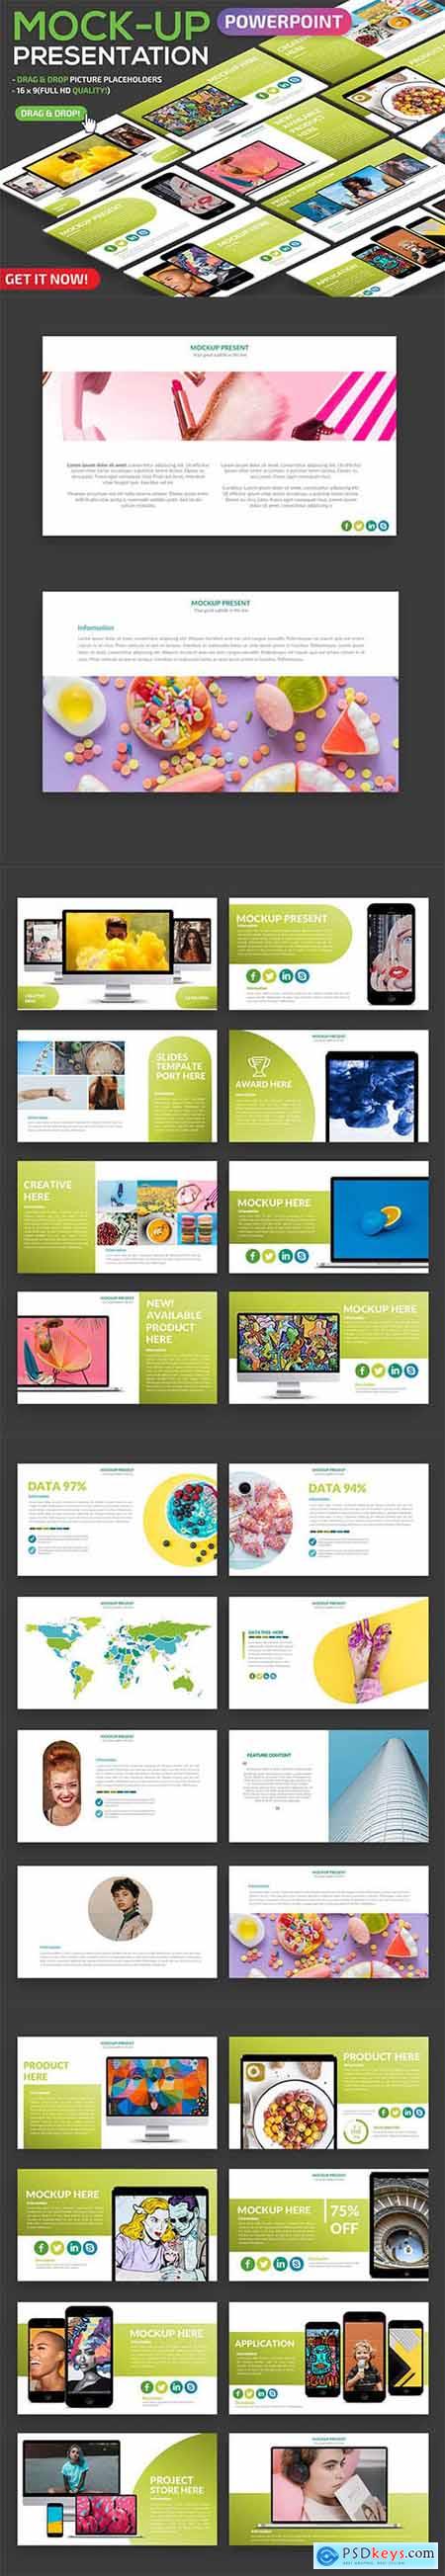 Mockup Powerpoint and Keynote Template